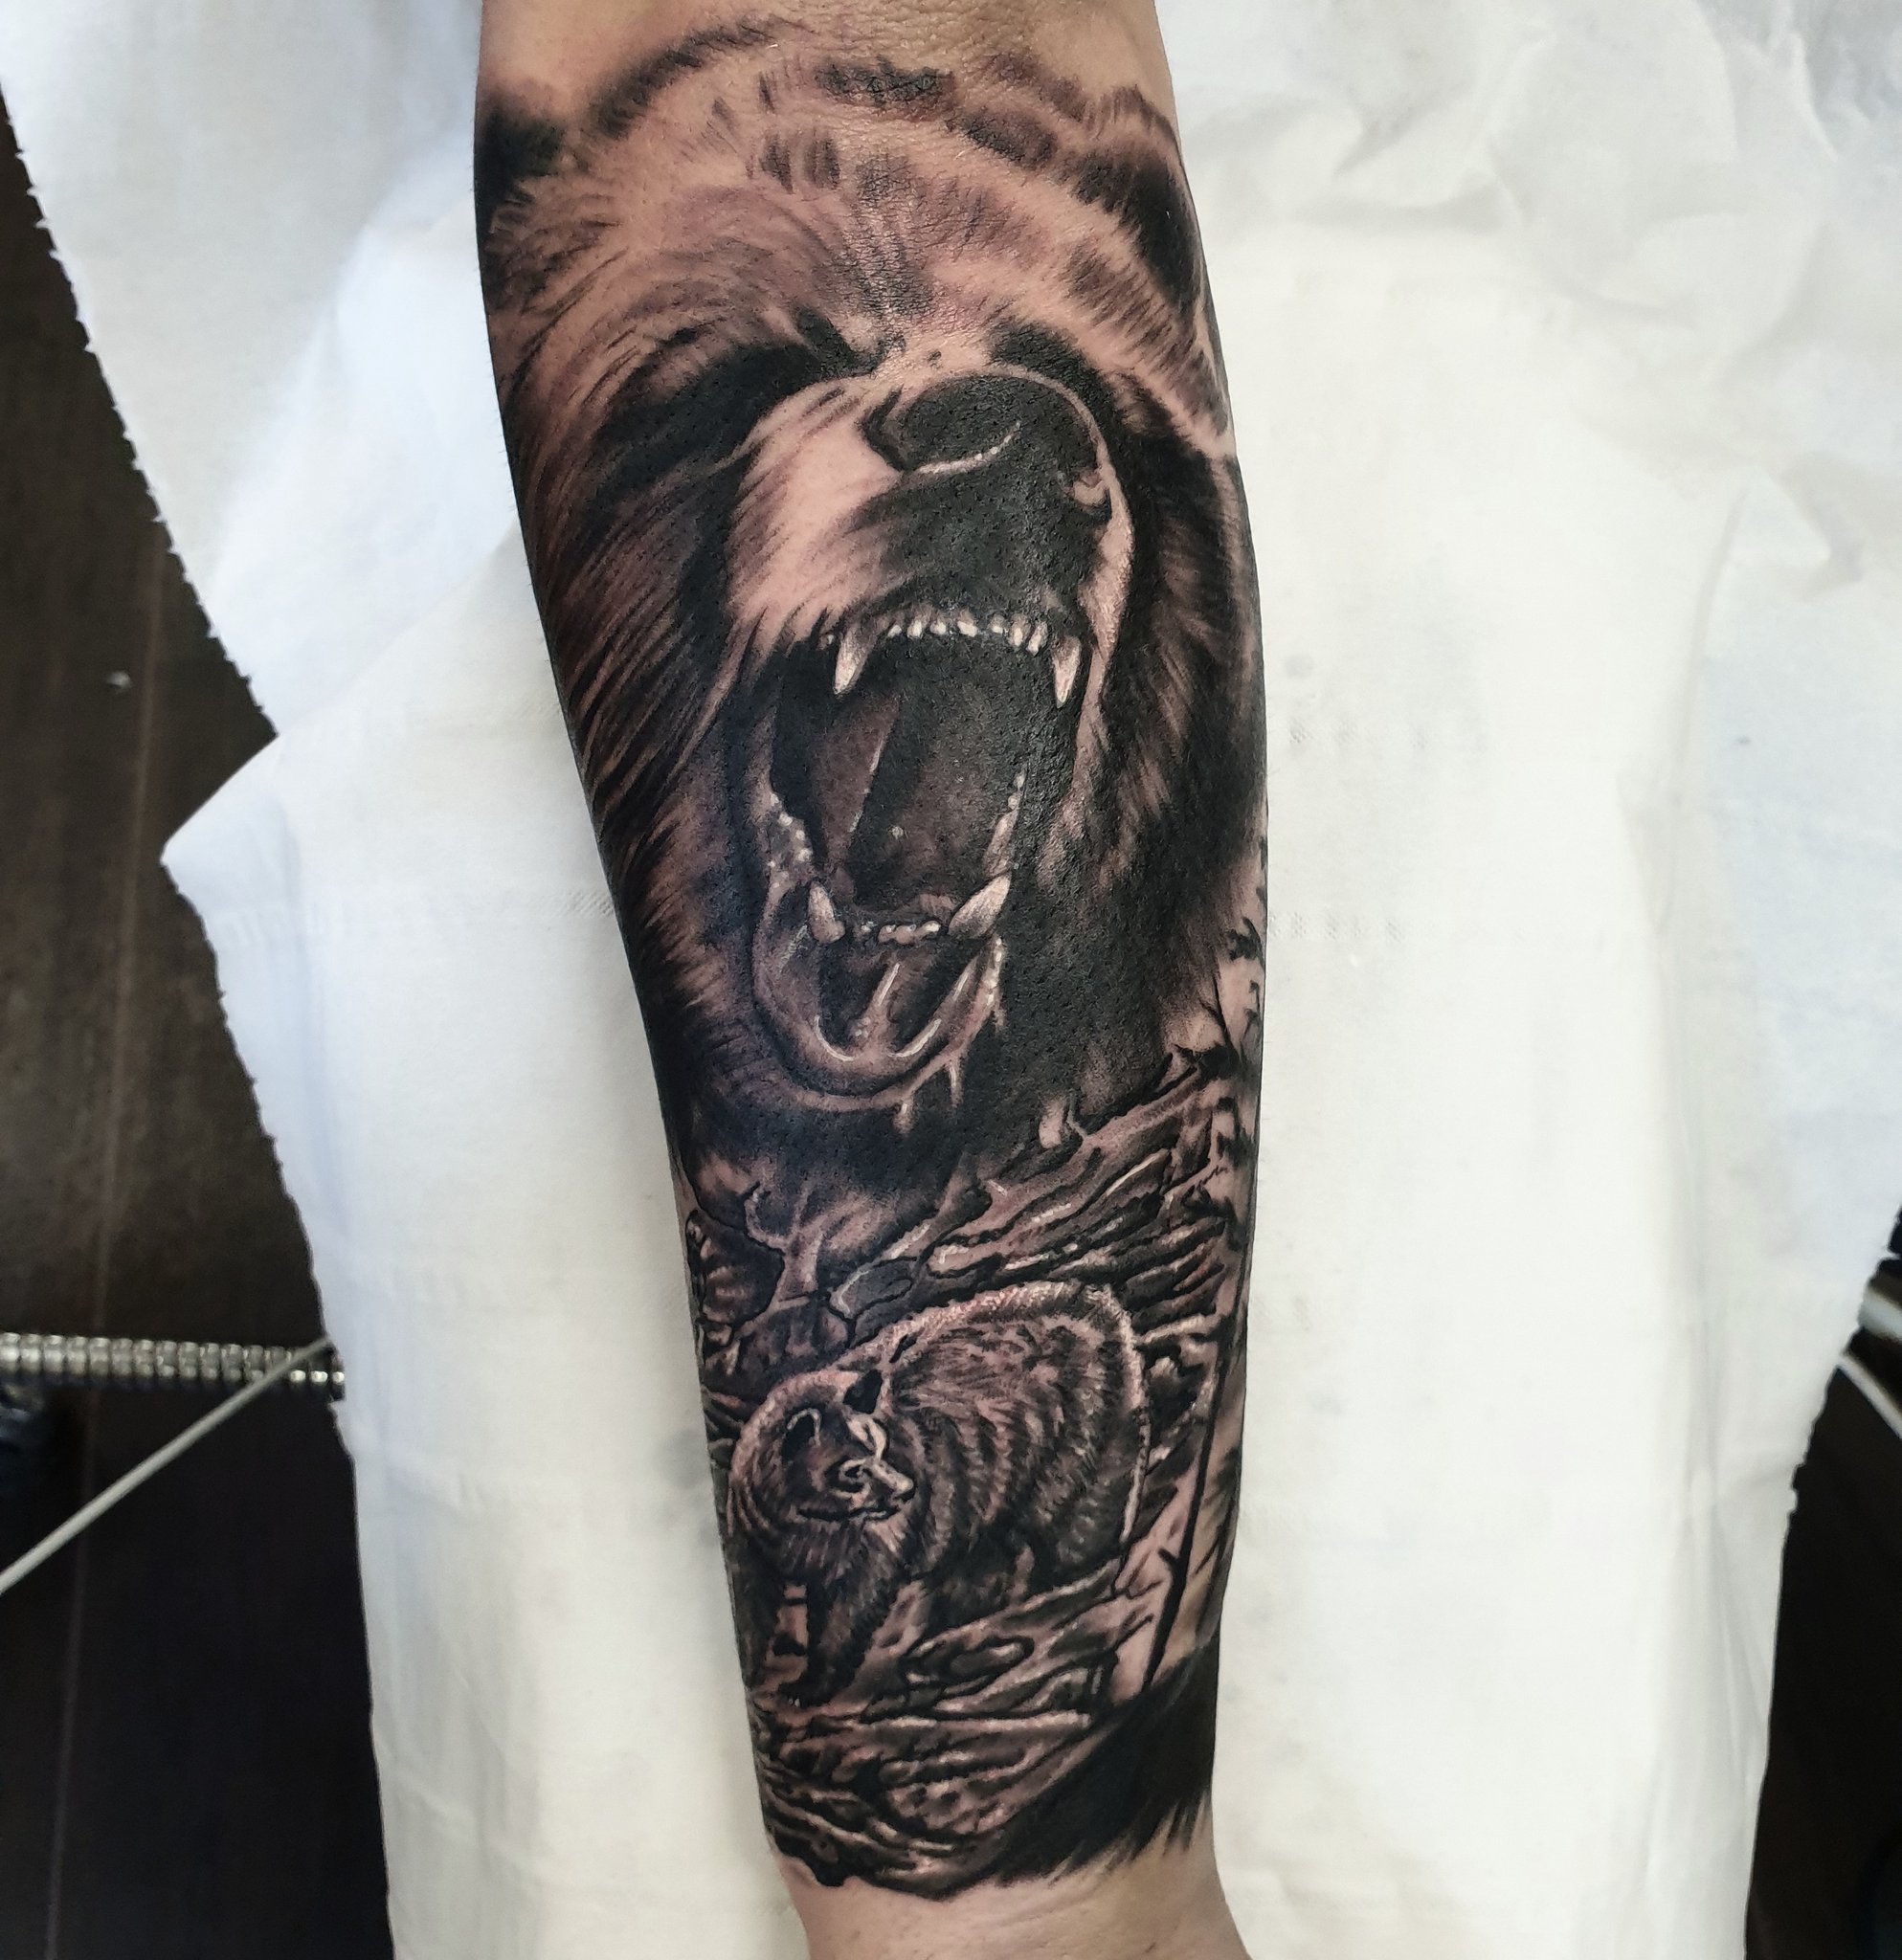 Black and grey bear tattoo on the right inner forearm